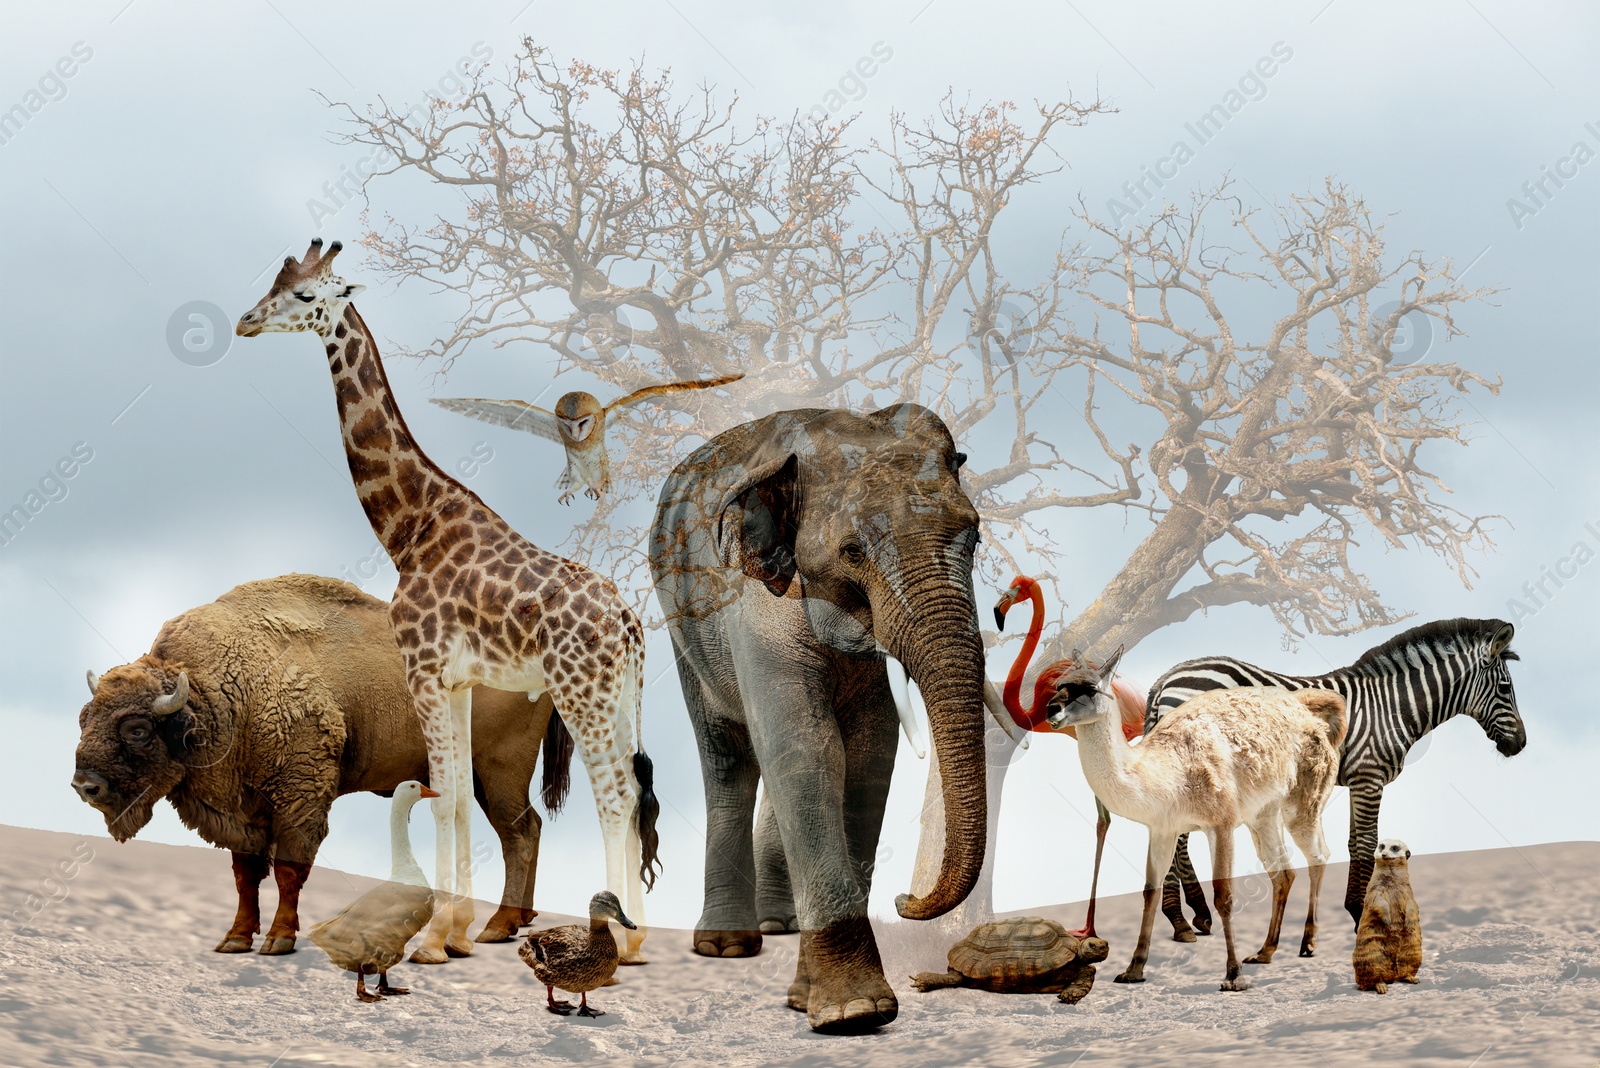 Image of Double exposure of different animals and dry tree among parched soil. Global warming, climate change